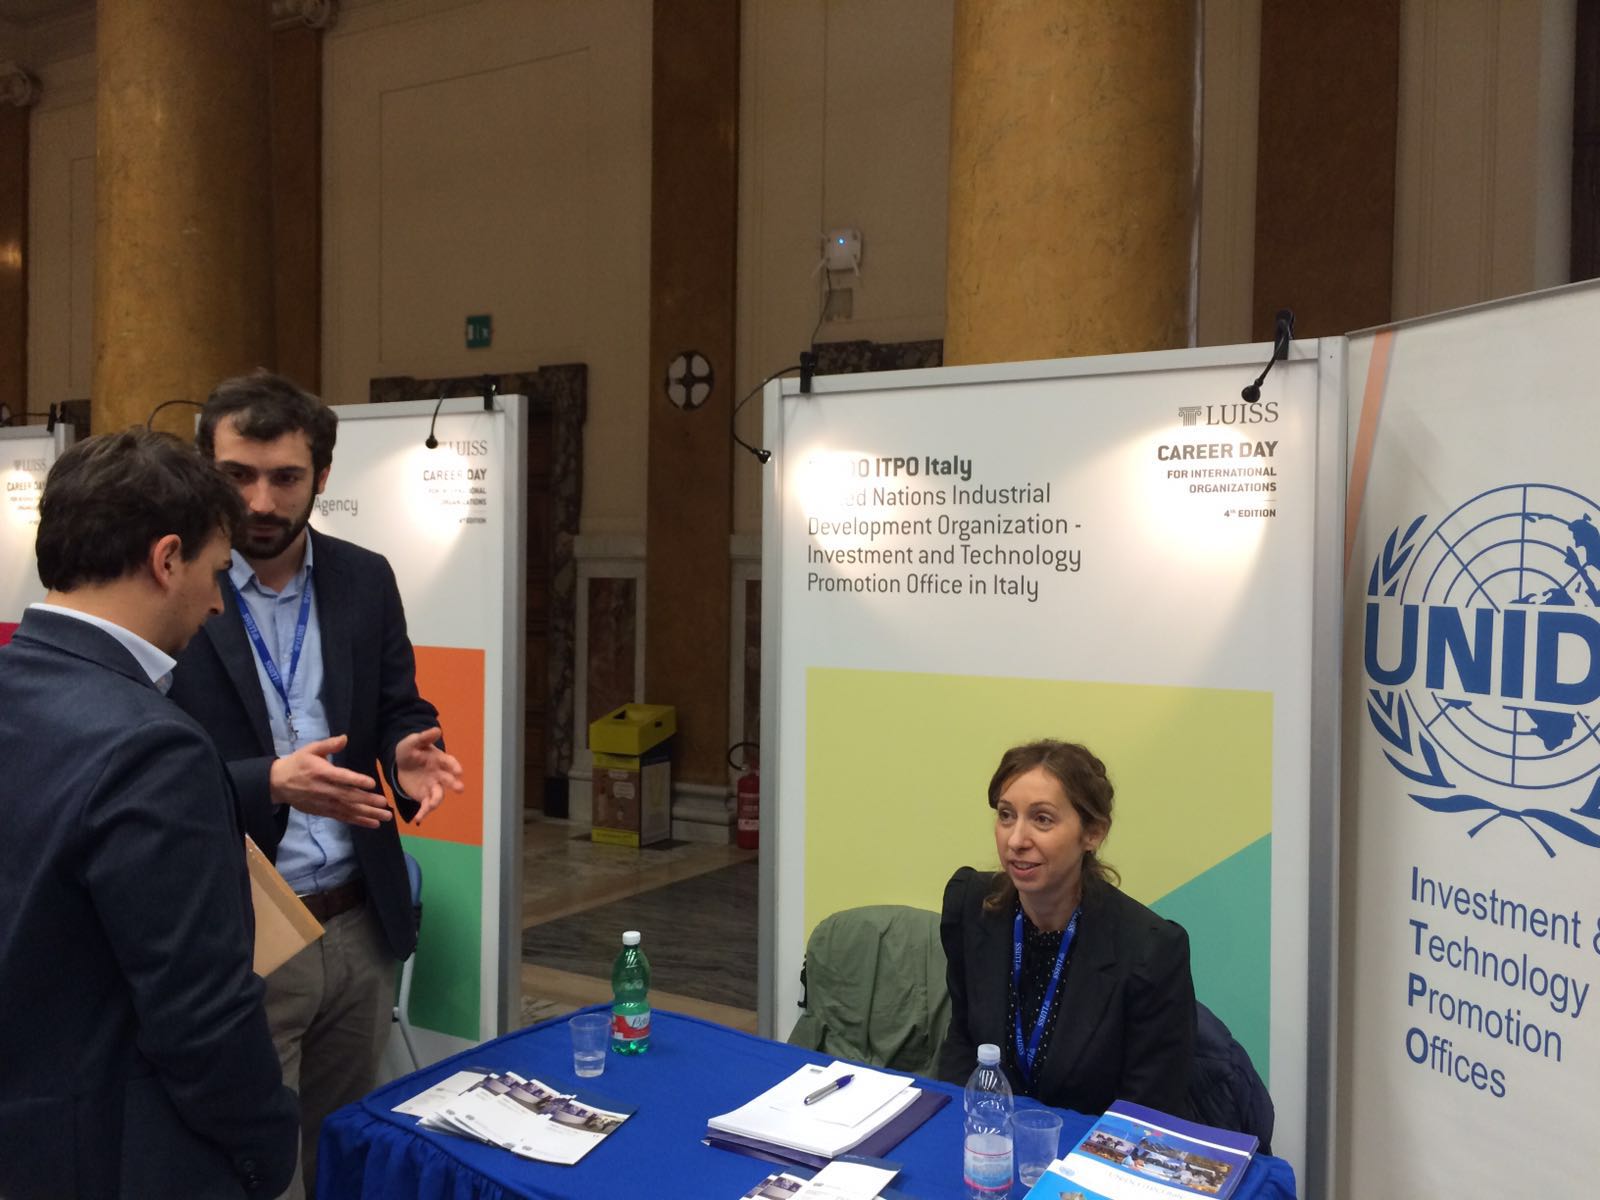 UNIDO ITPO Italy took part in the LUISS Career Day for International Organizations